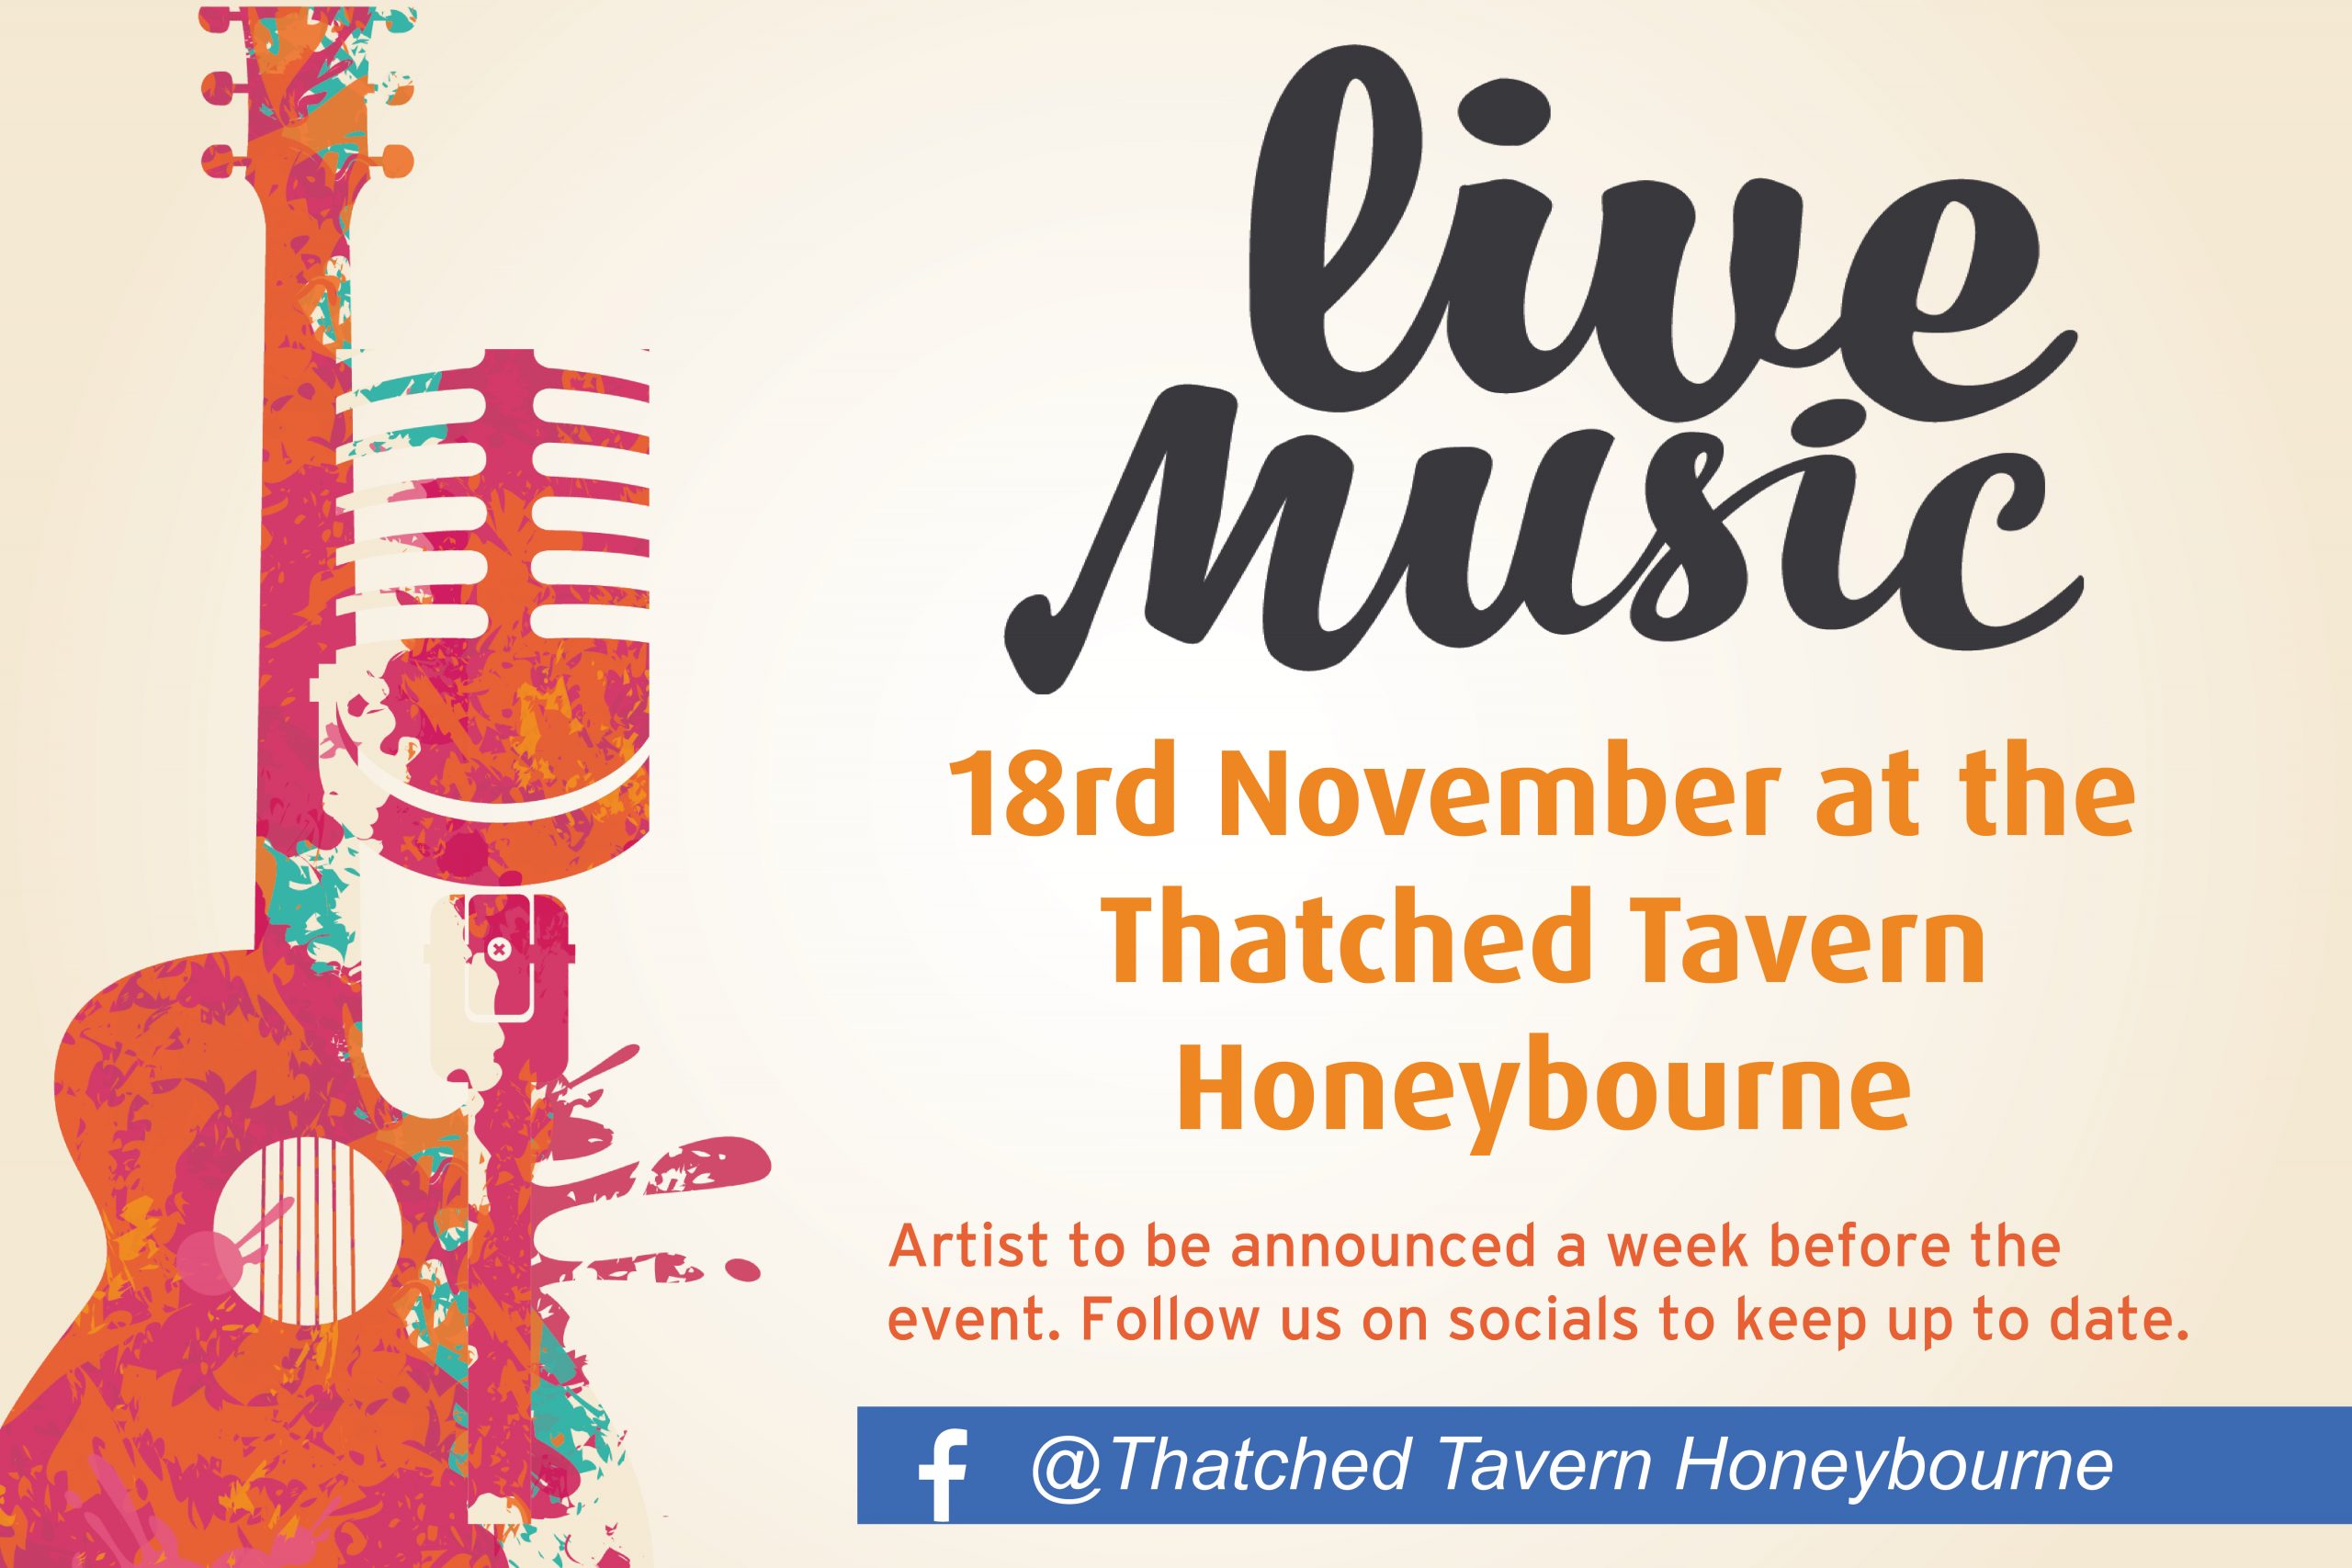 Live Music at the Thatched Tavern Honeybourne 18th November 2022